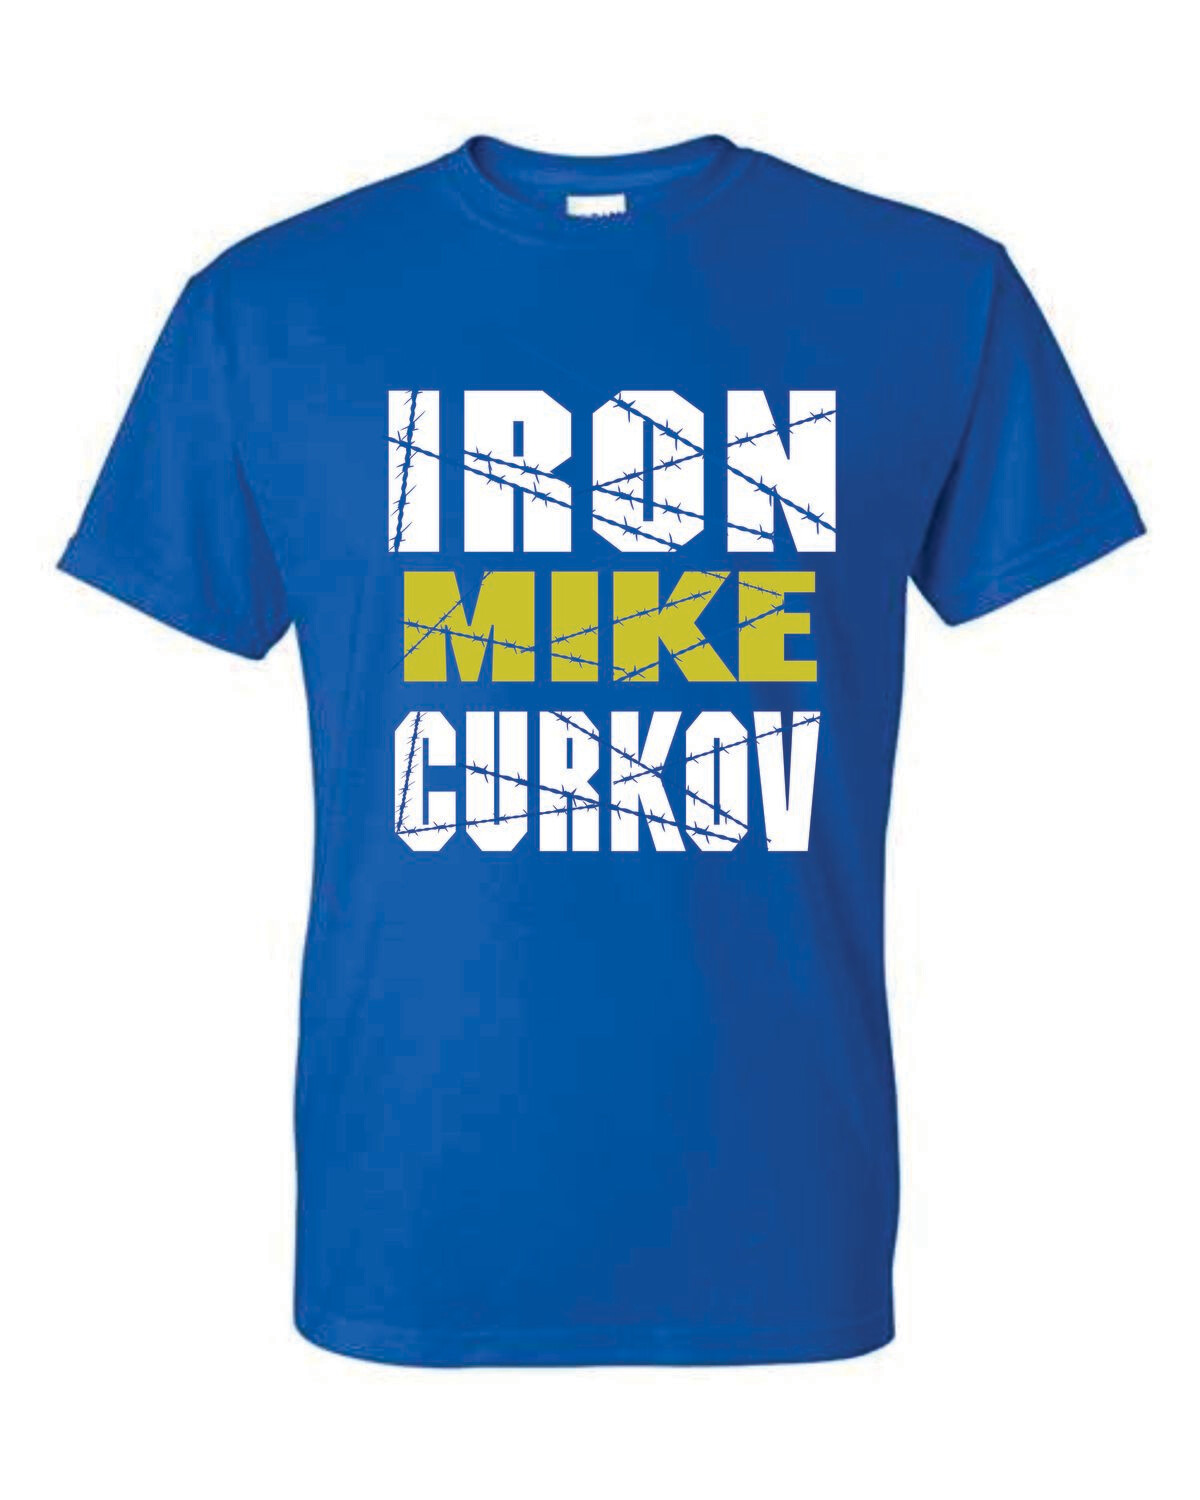 IRON MIKE CURKOV T-SHIRT FOR CHARITY